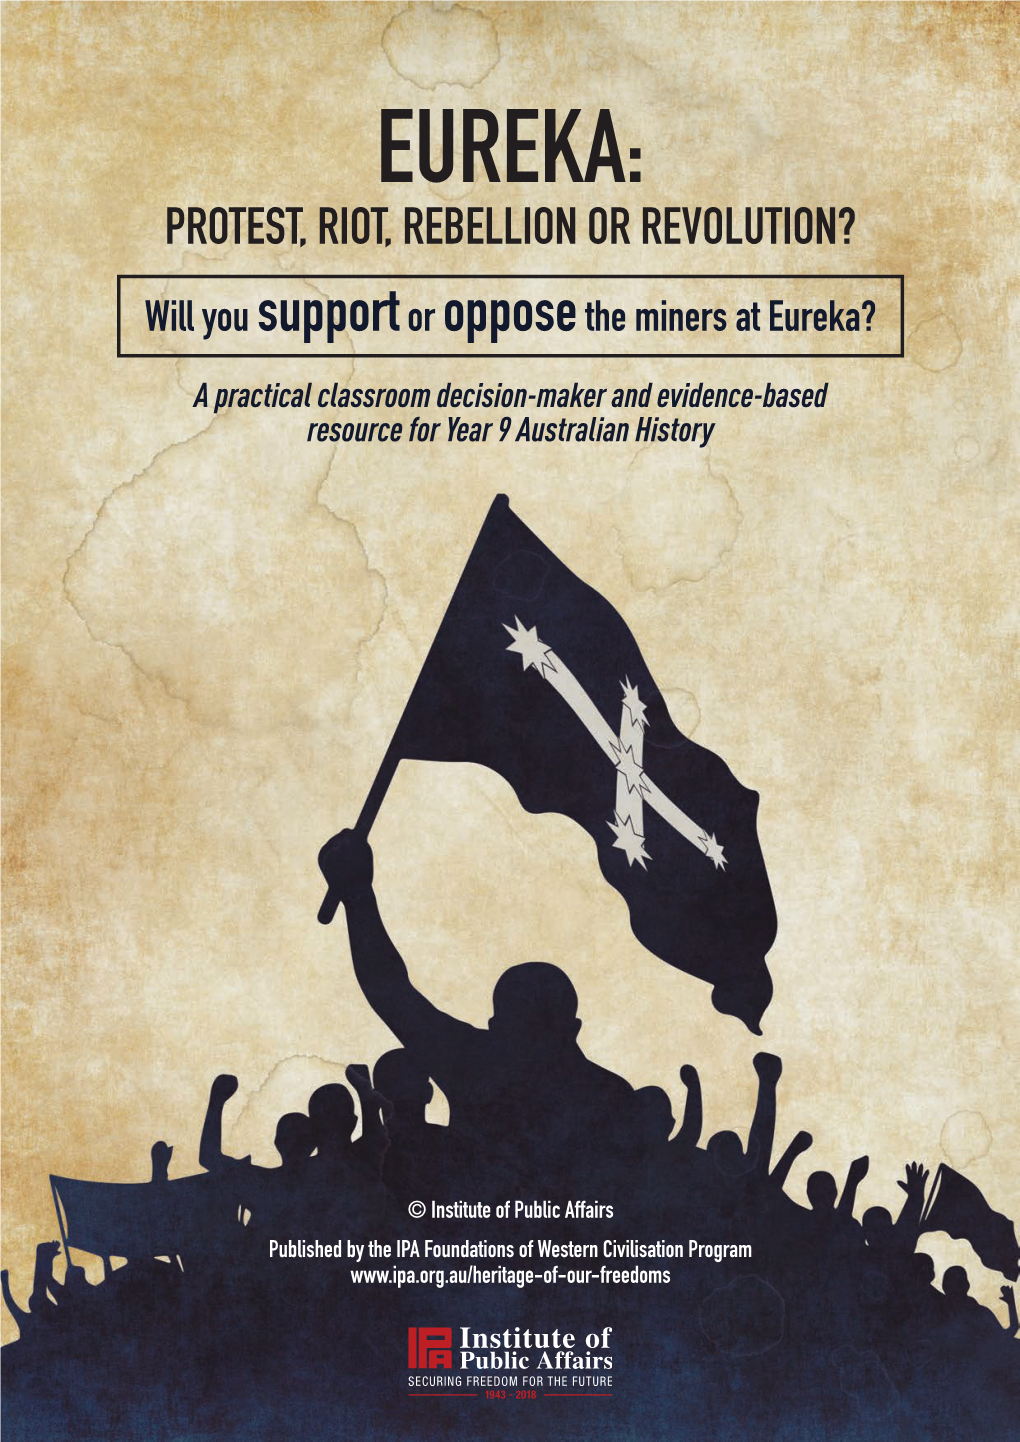 EUREKA: PROTEST, RIOT, REBELLION OR REVOLUTION? Will You Support Or Oppose the Miners at Eureka?